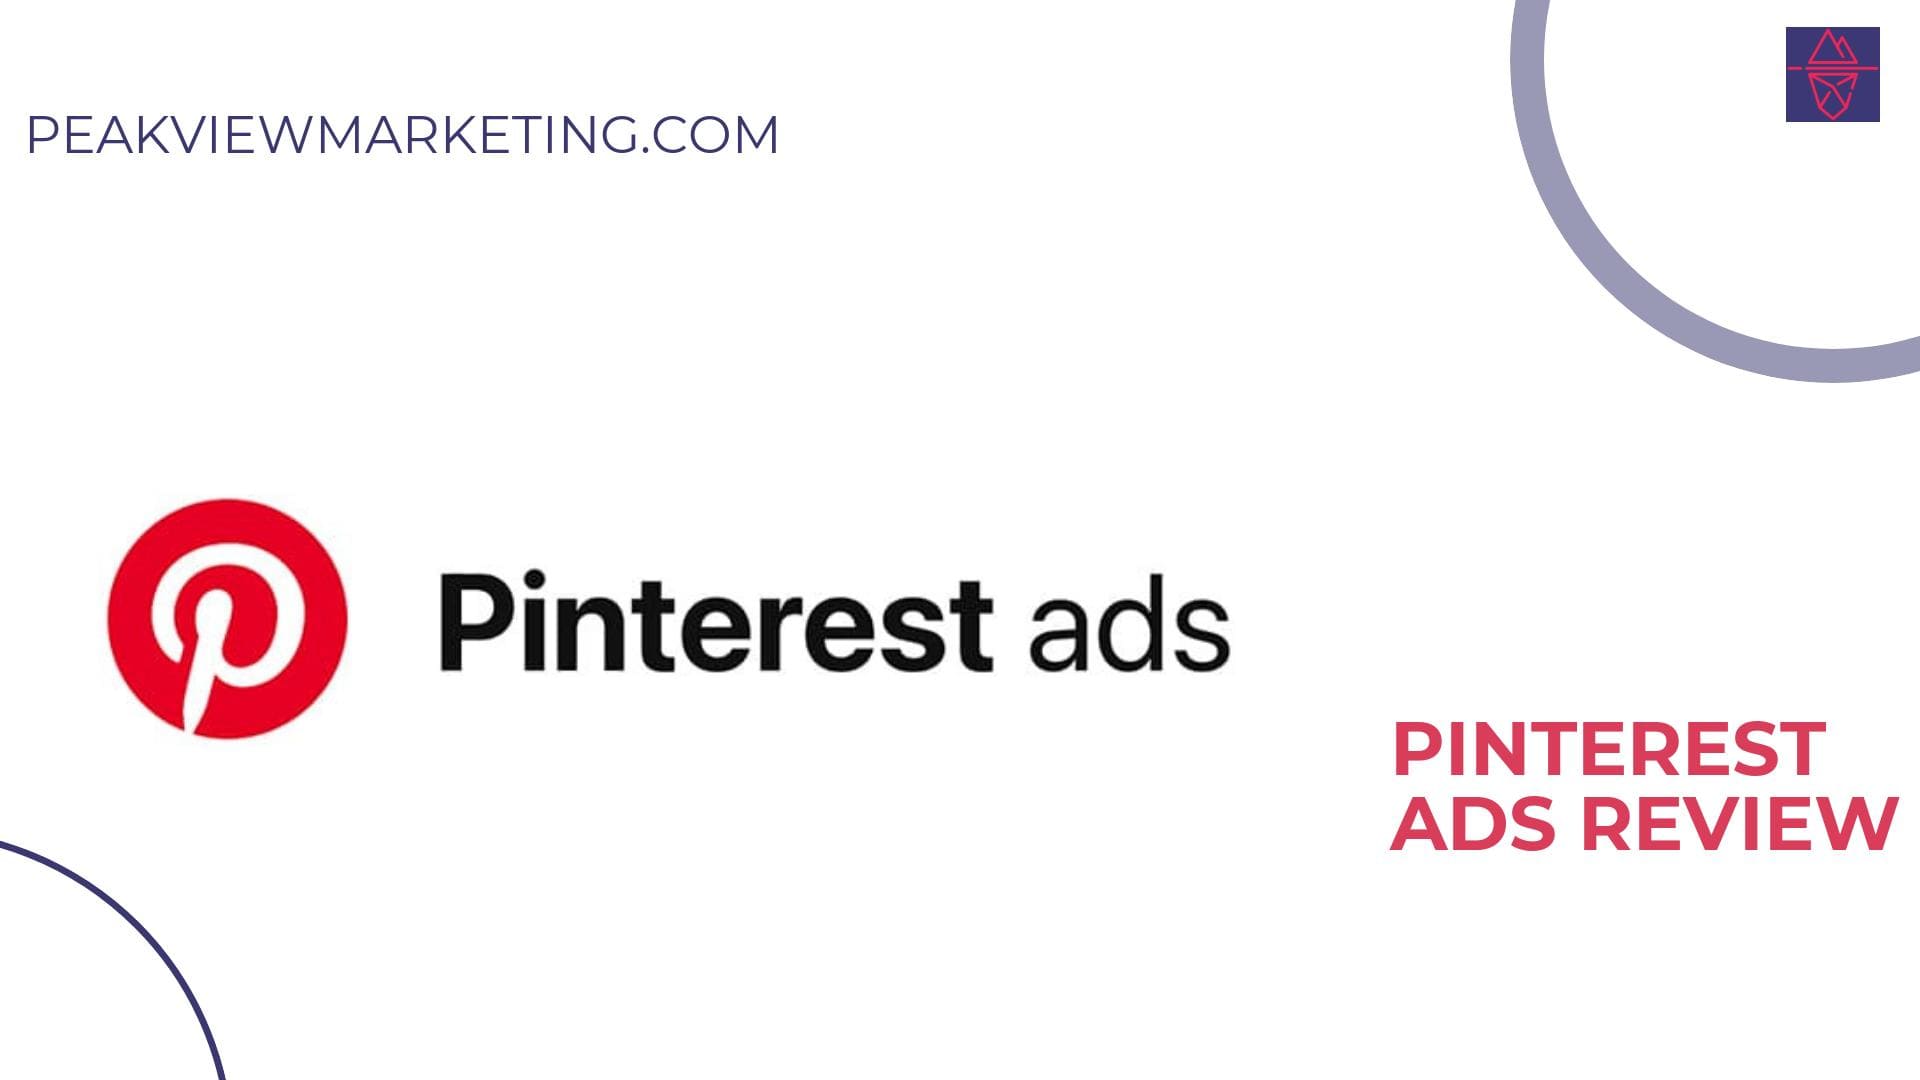 Pinterest Ads Review Image